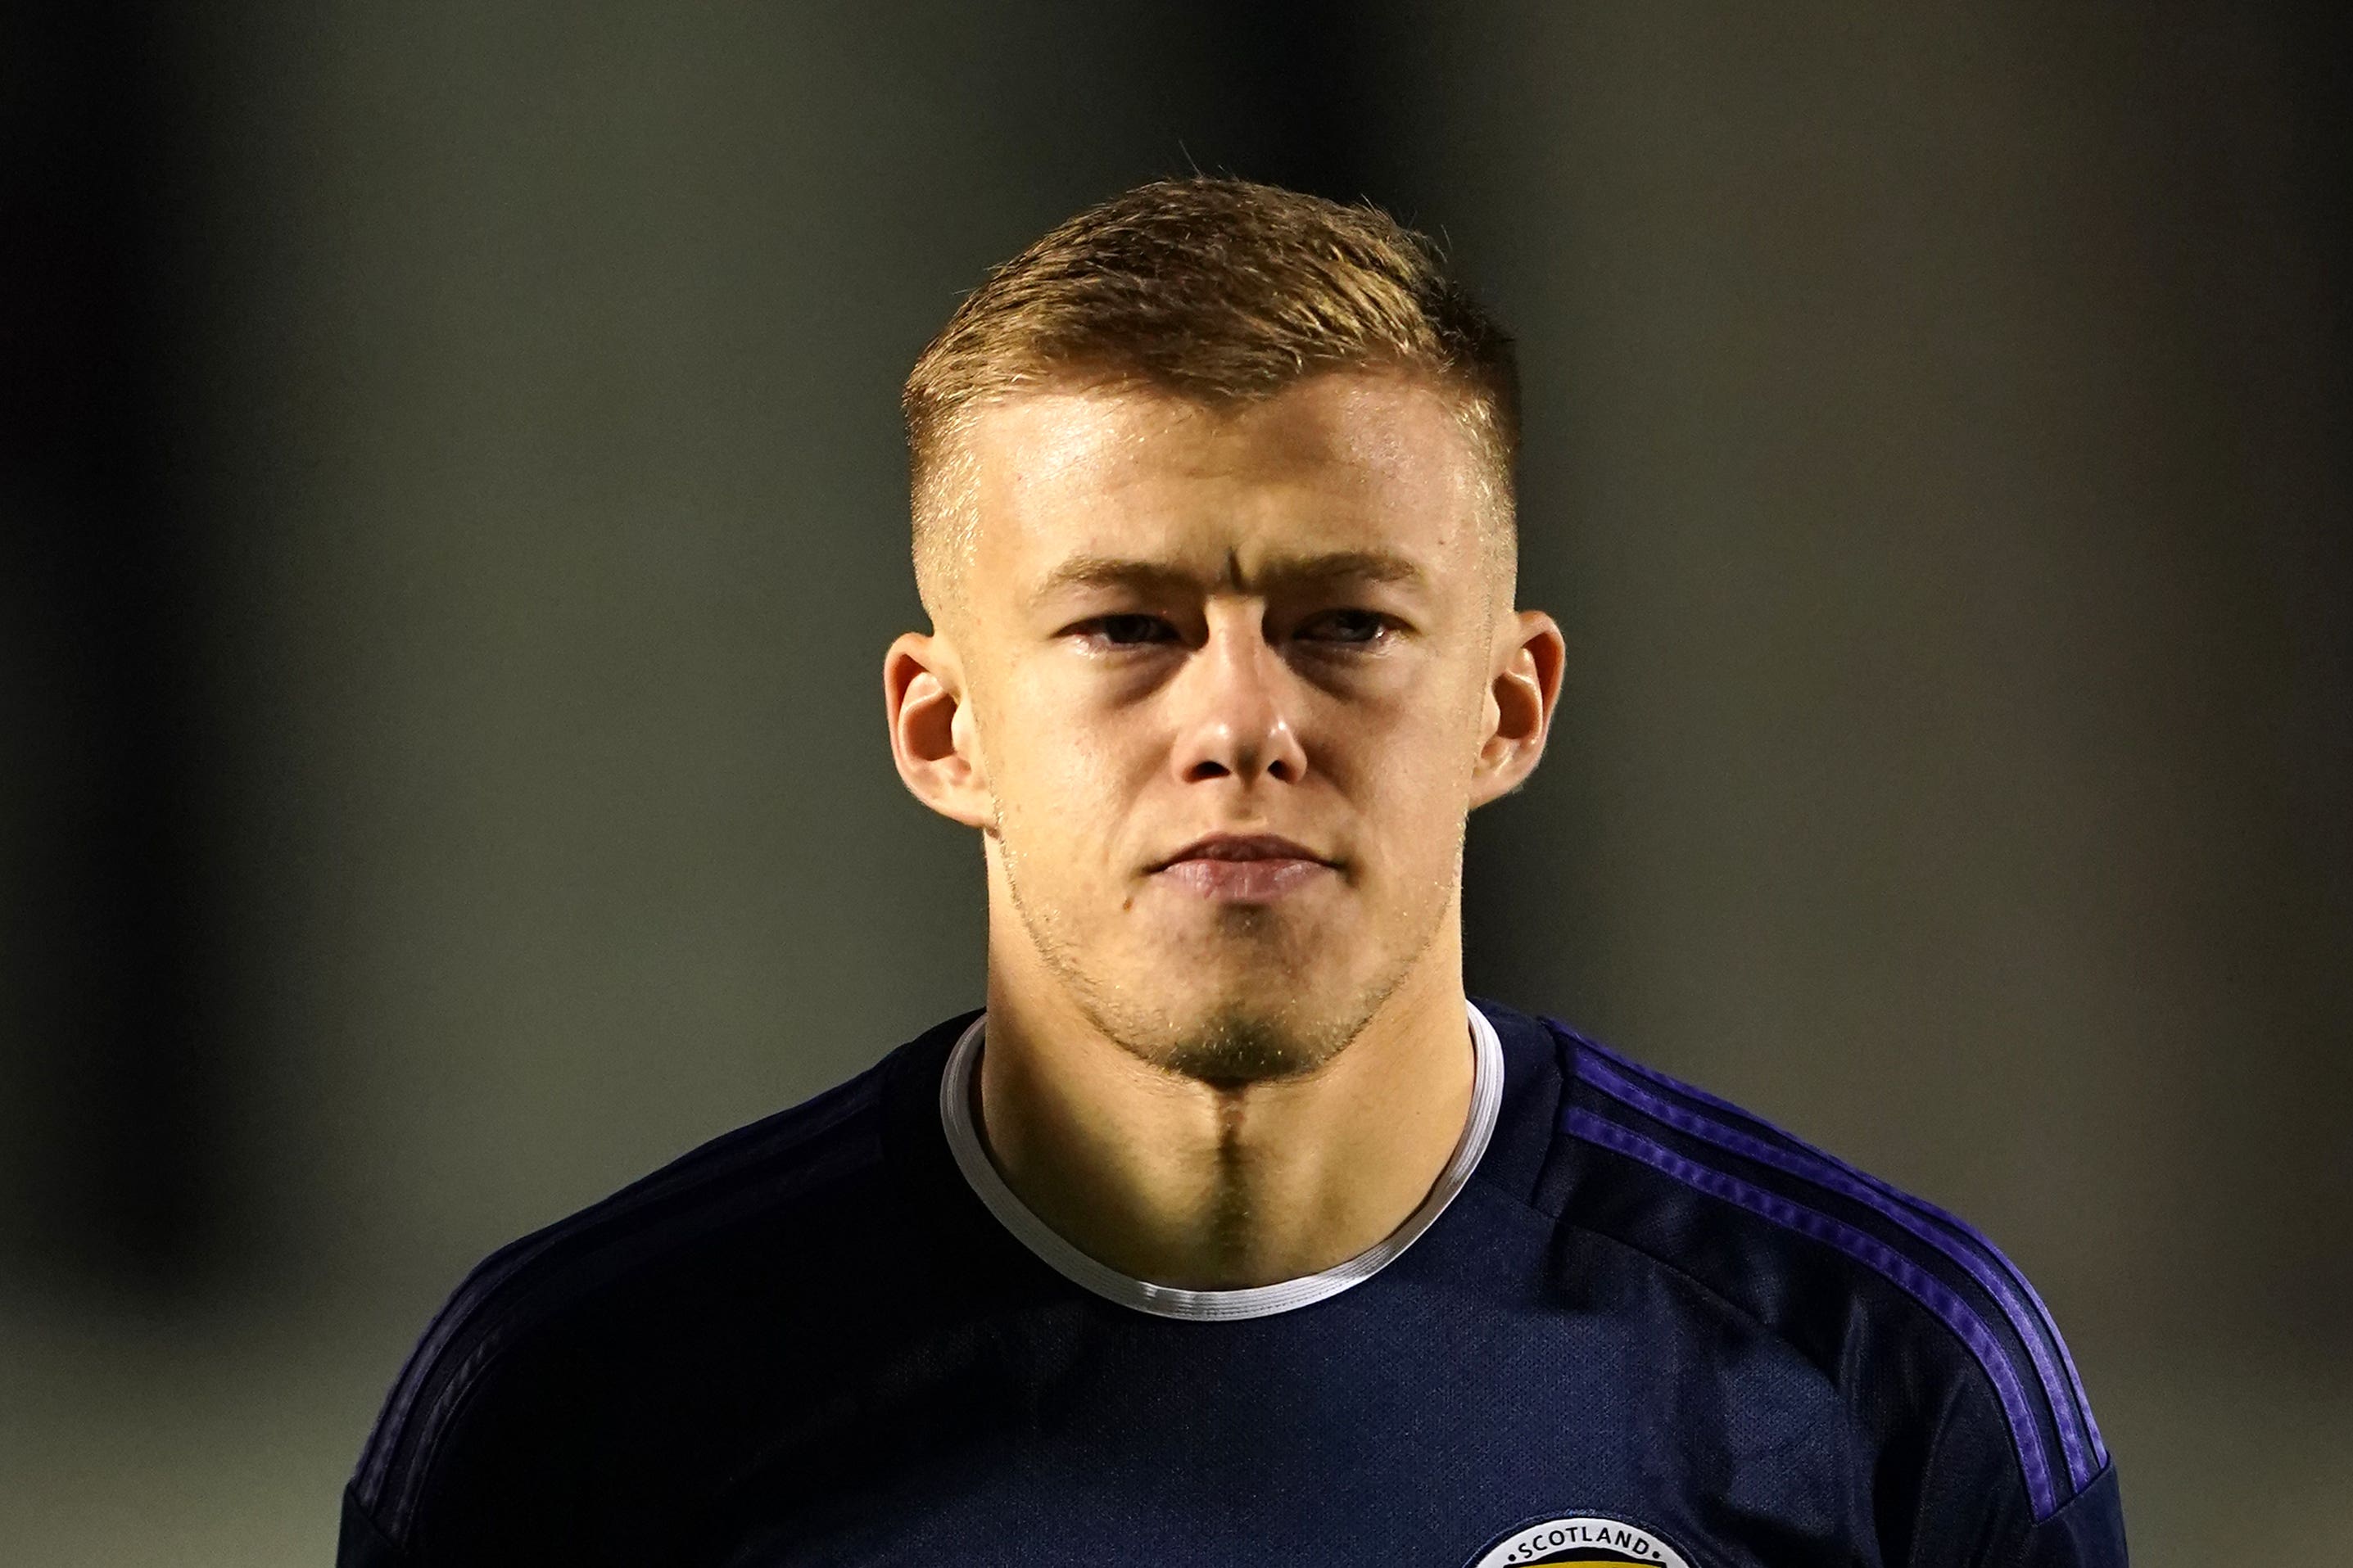 Scotland Under-21 international Connor Barron has joined Rangers from Aberdeen (Andrew Milligan/PA)